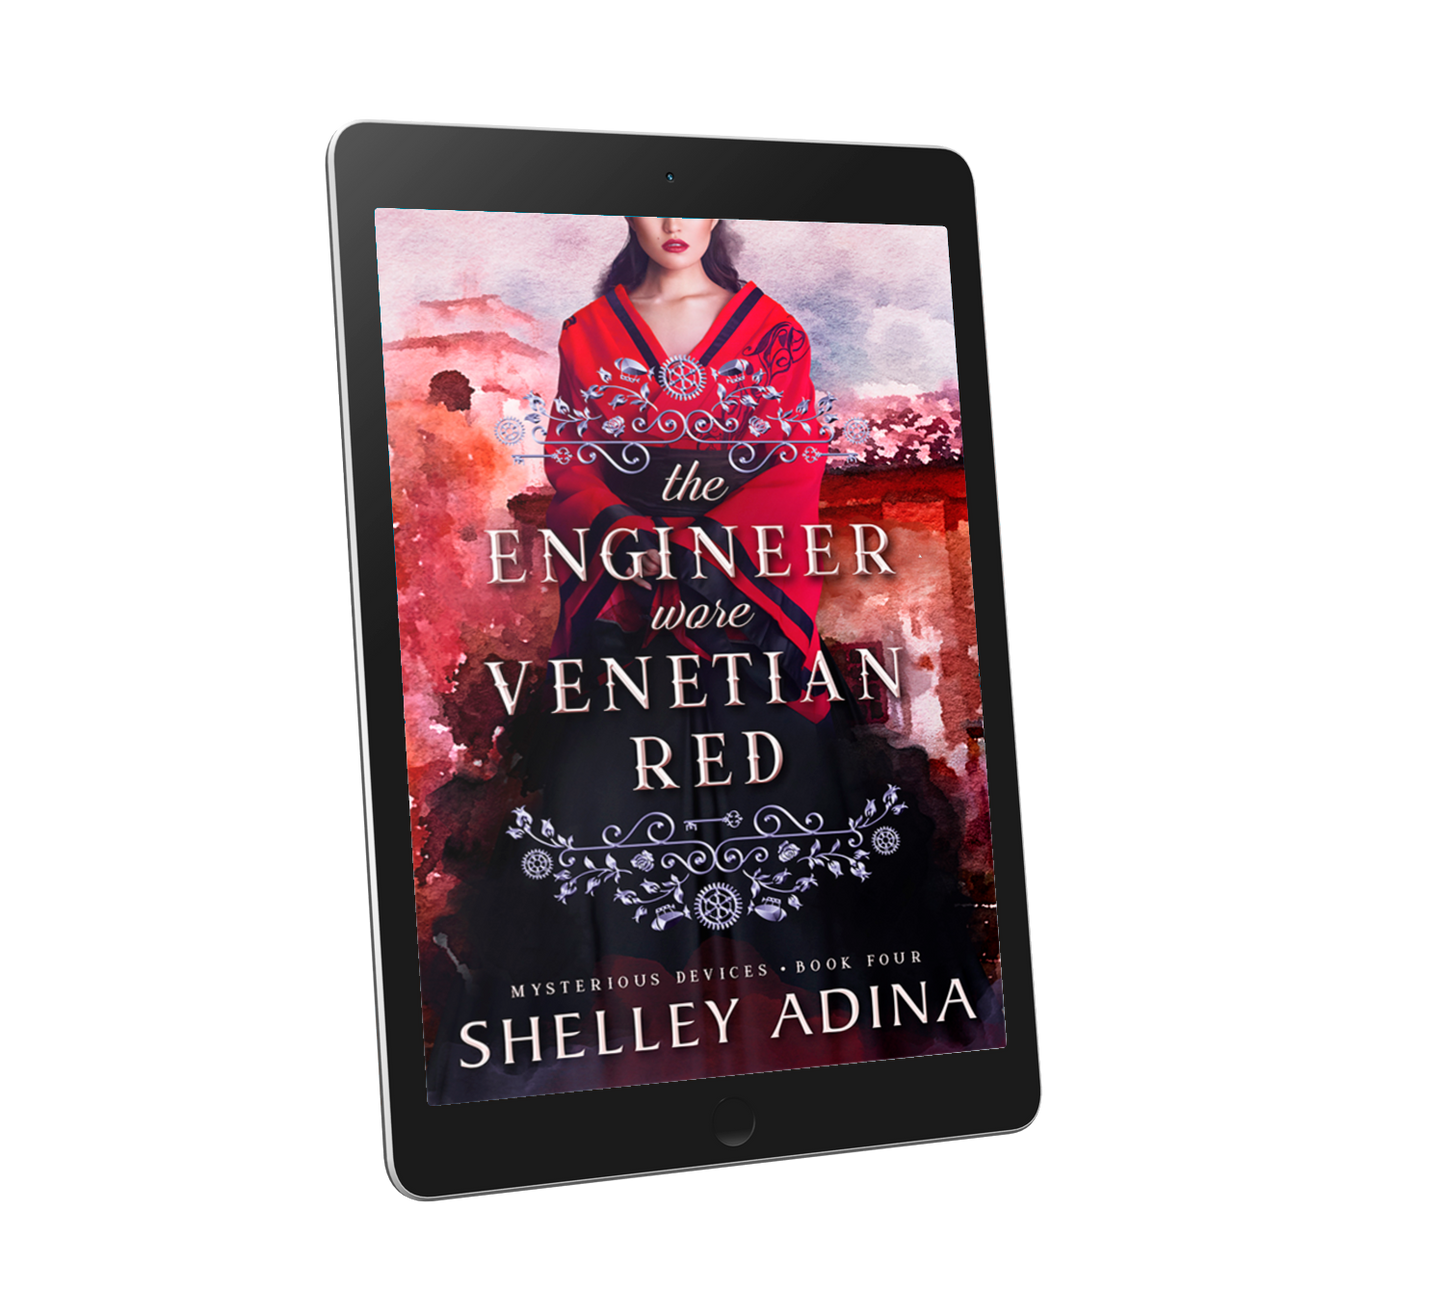 The Engineer Wore Venetian Red by Shelley Adina, a steampunk adventure mystery novel